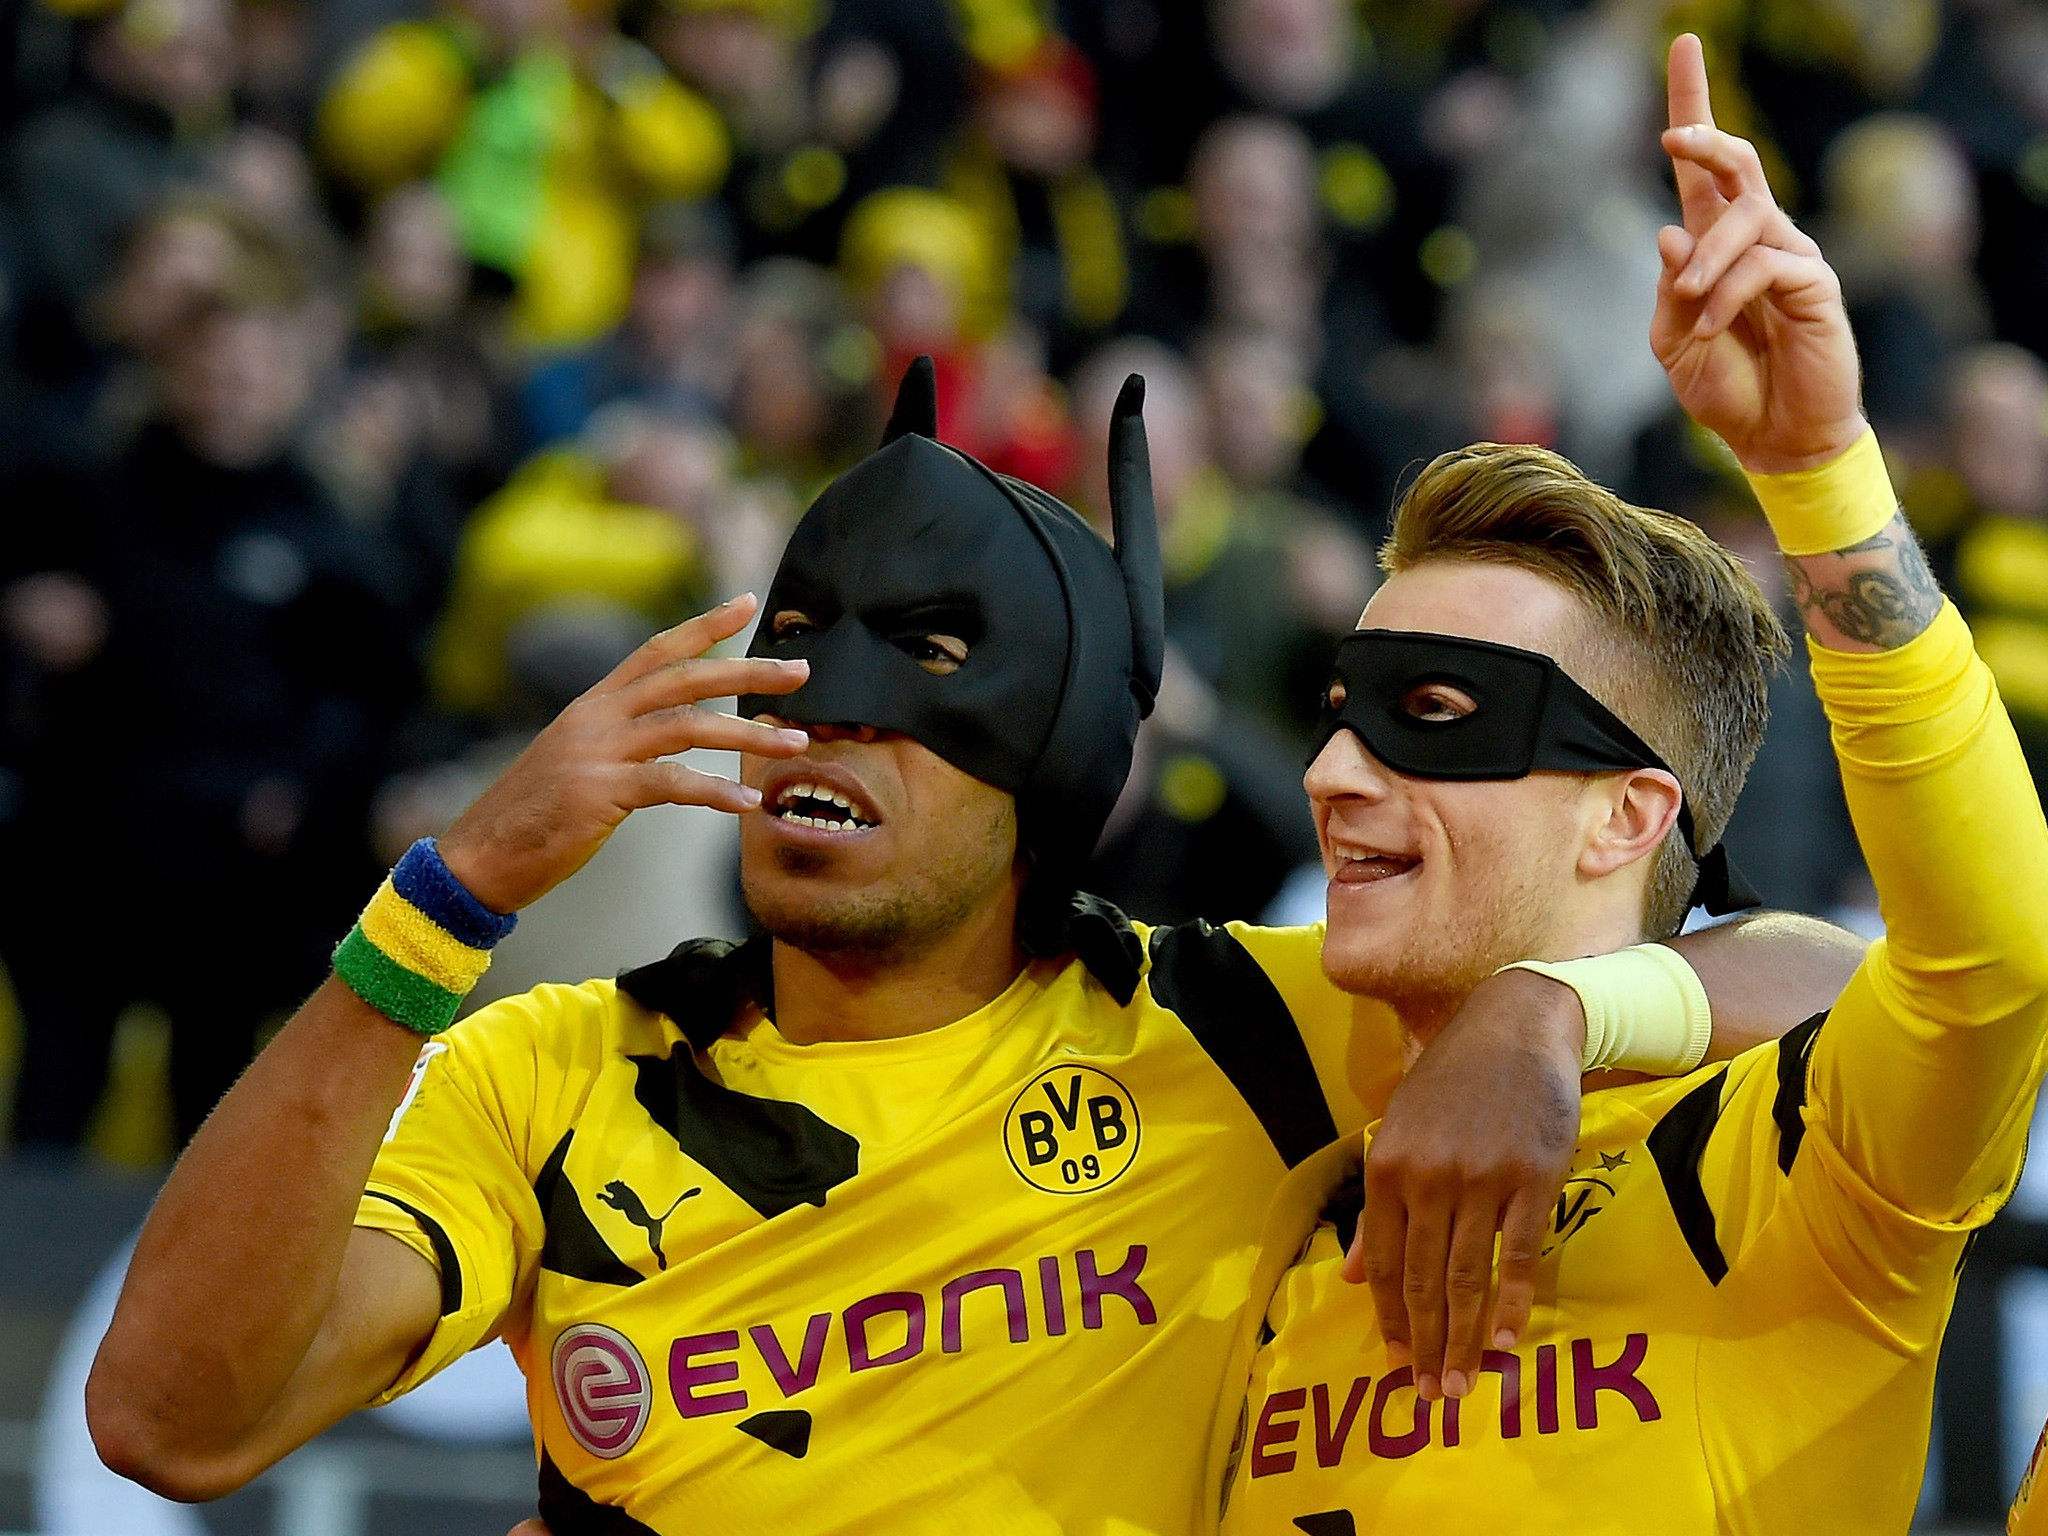 2048x1536 Marco Reus and Pierre-Emerick Aubameyang dress as Batman and Robin during  Borussia Dortmund's game with rivals Schalke | The Independent